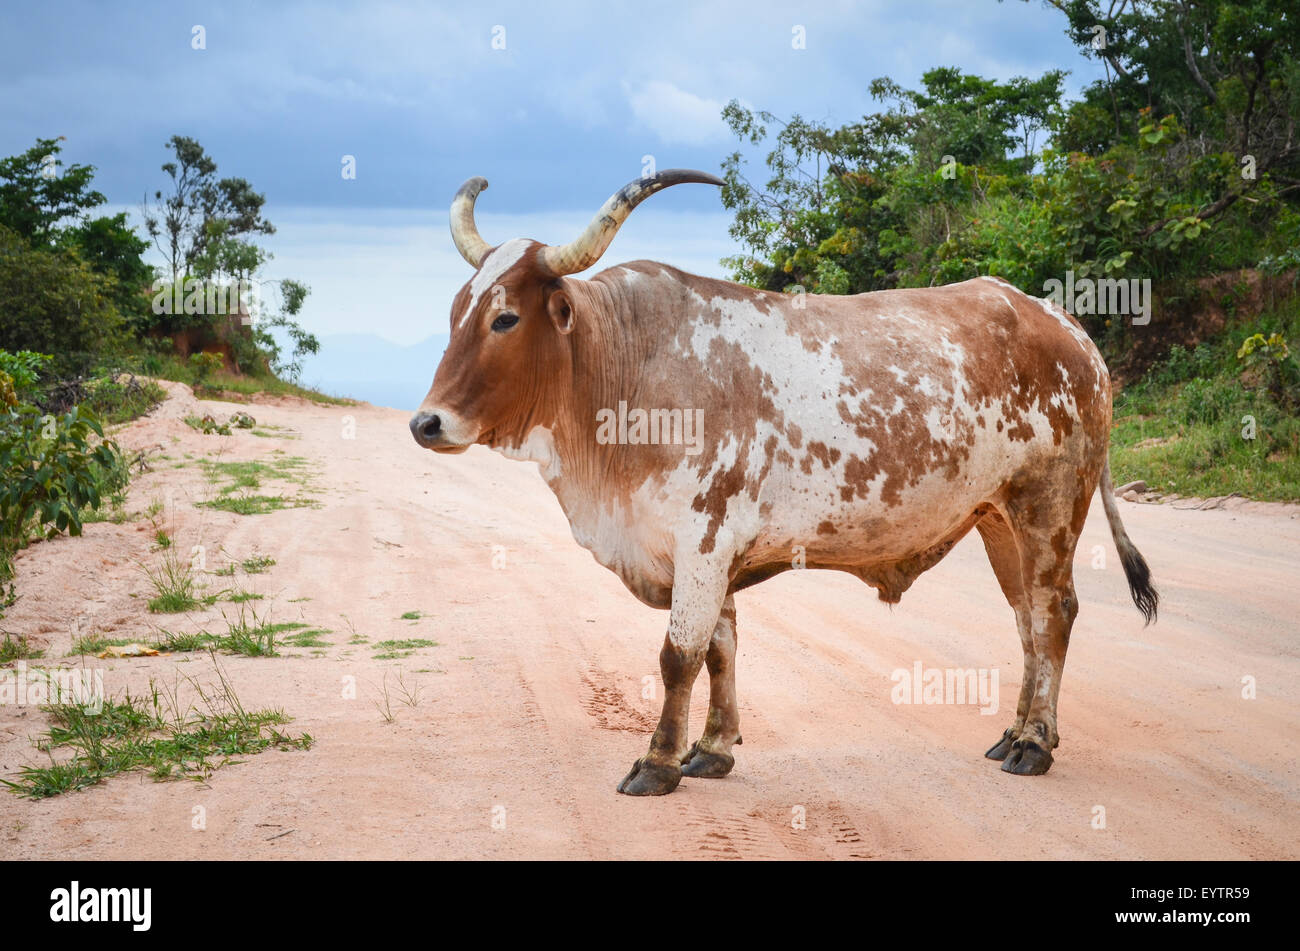 Cow with horns on a dirt road in Angola Stock Photo